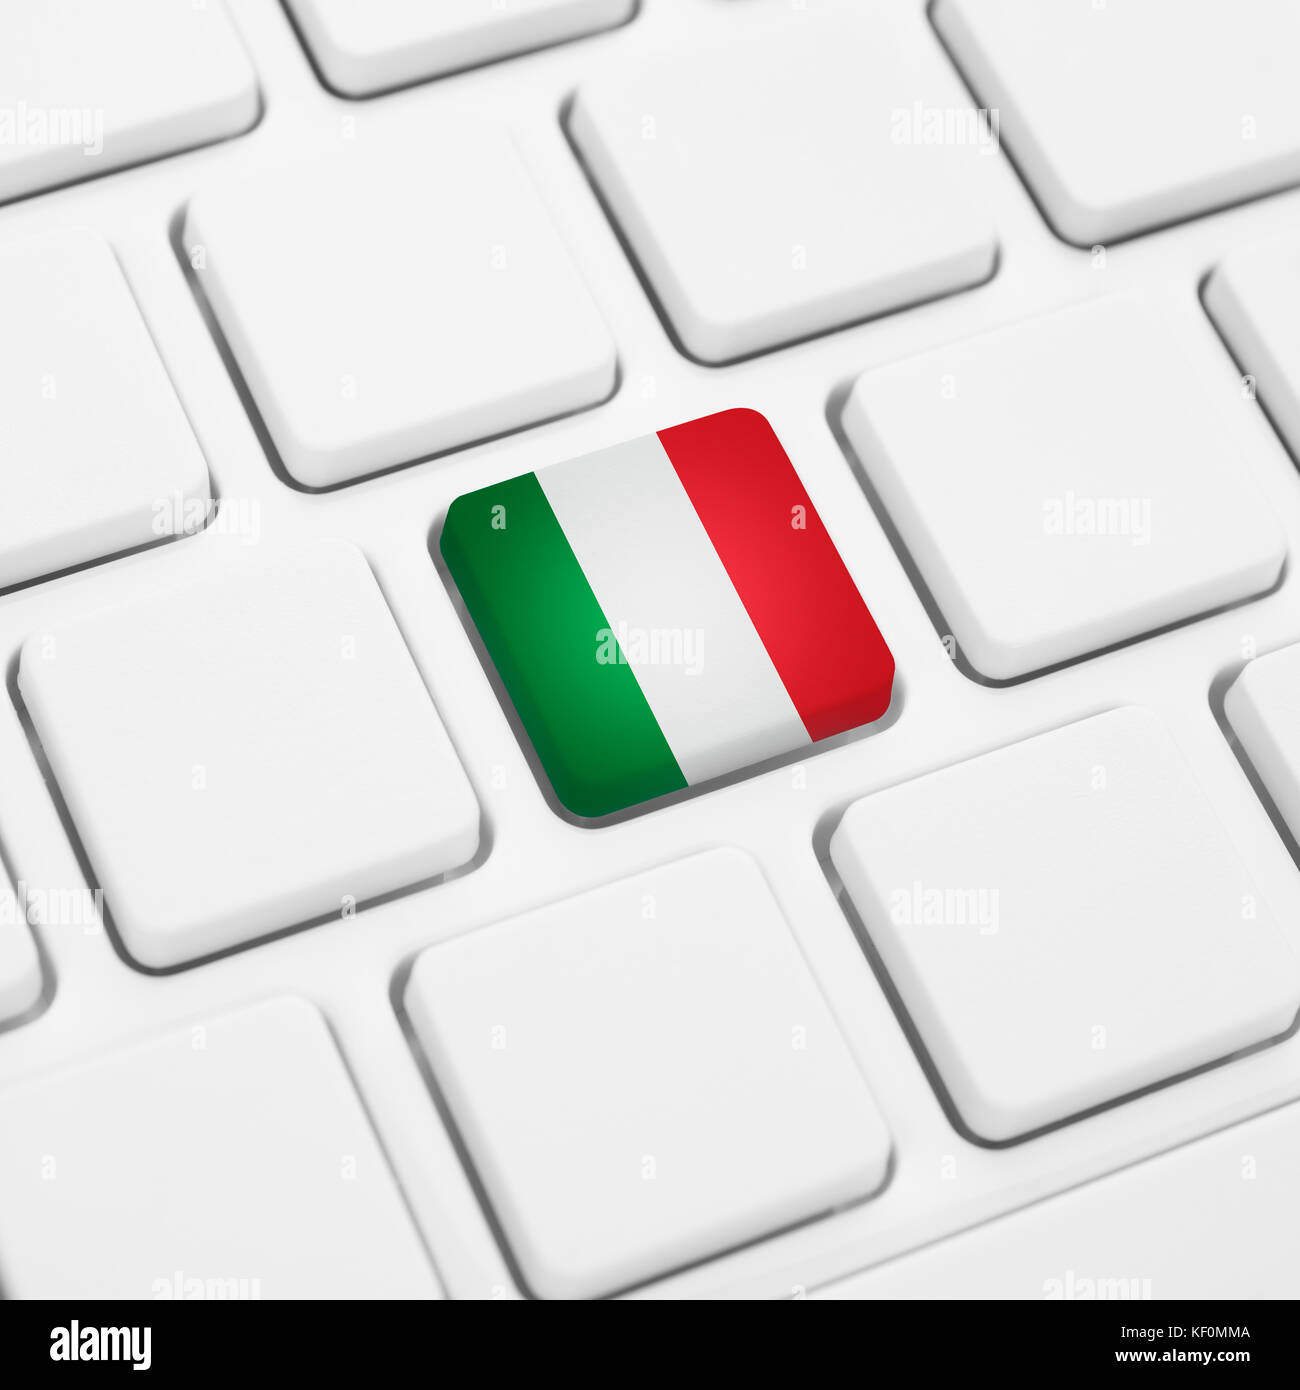 Italian language or Italy web concept. National flag button or key on white keyboard Stock Photo